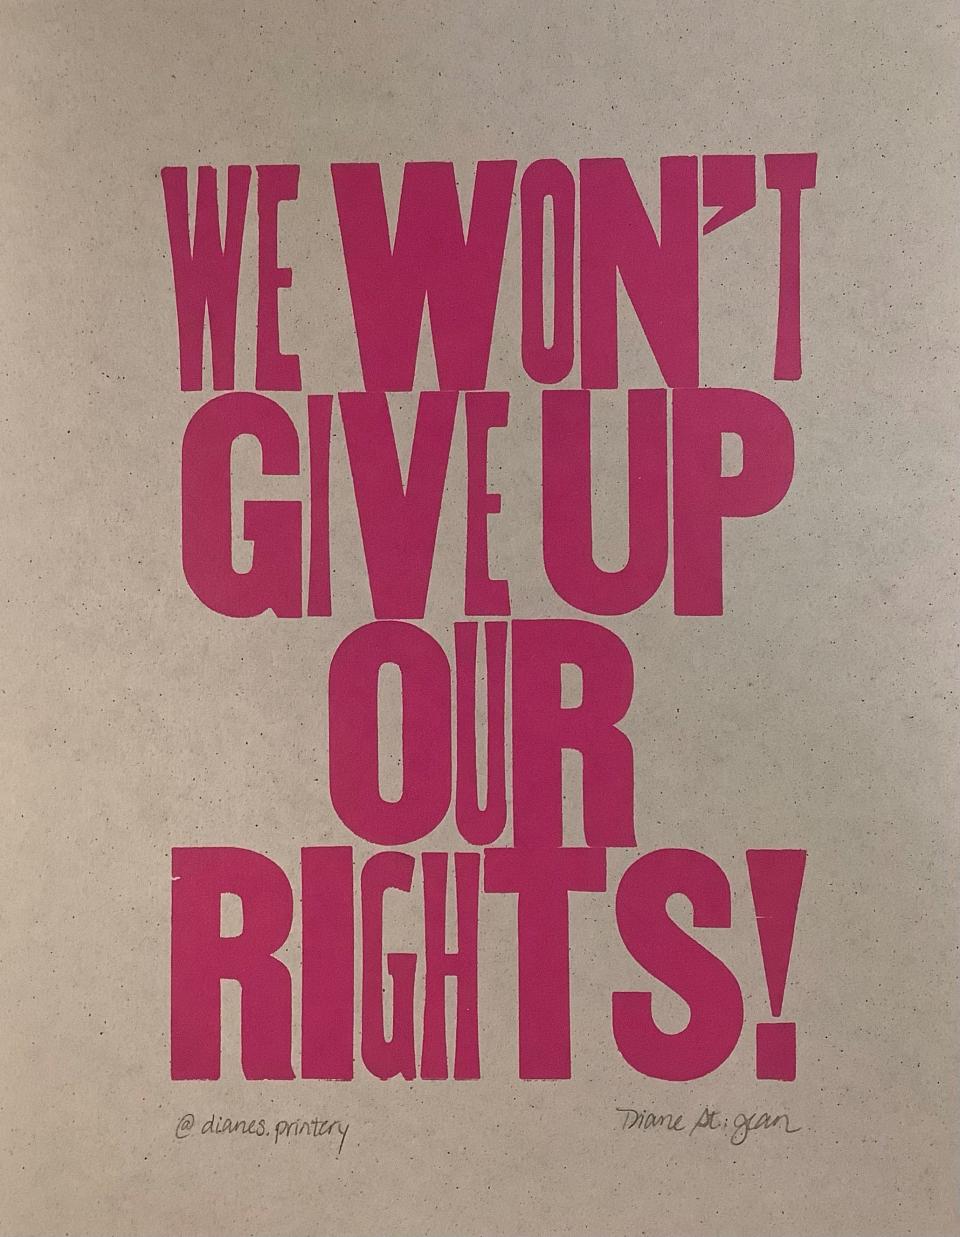 We Won't Give Up artwork by Diane St. Jean